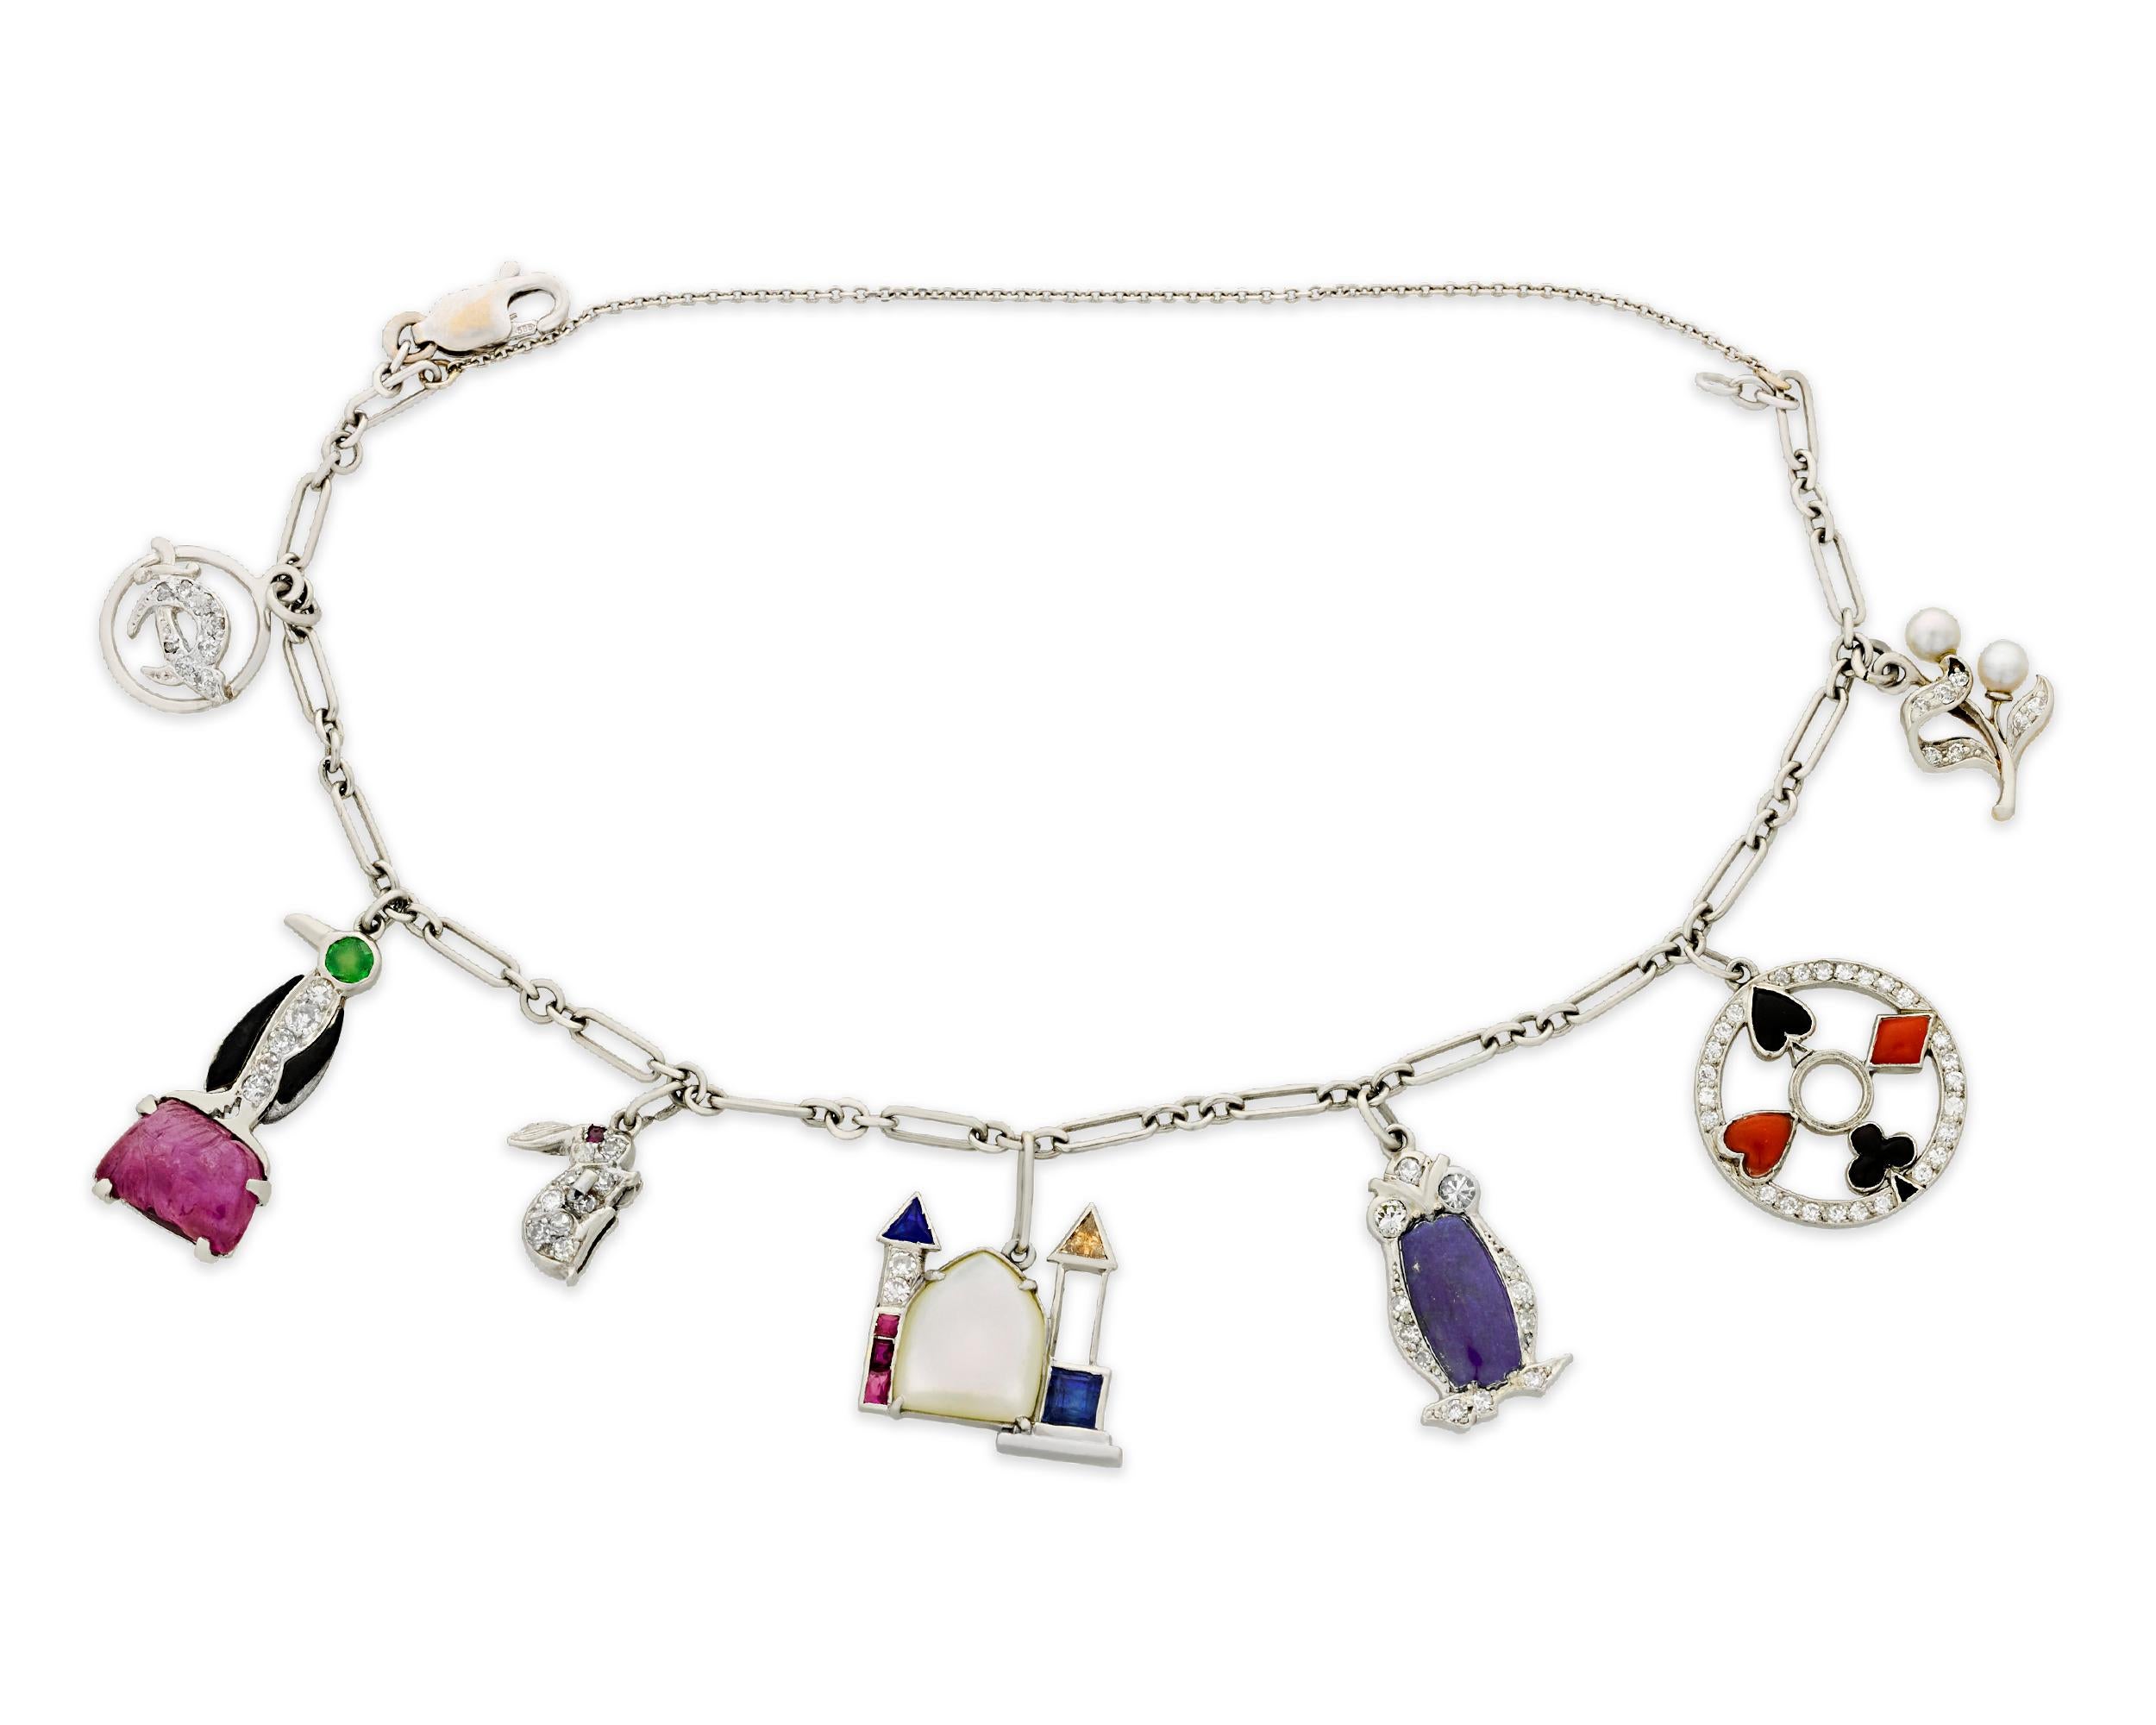 This delightful platinum Art Deco-period charm bracelet exudes a playful whimsy. The charms include a variety of jovial motifs, including a bunny, a penguin, an owl, a castle, a pearl flower, playing card suites and a sword symbol. Each charm holds